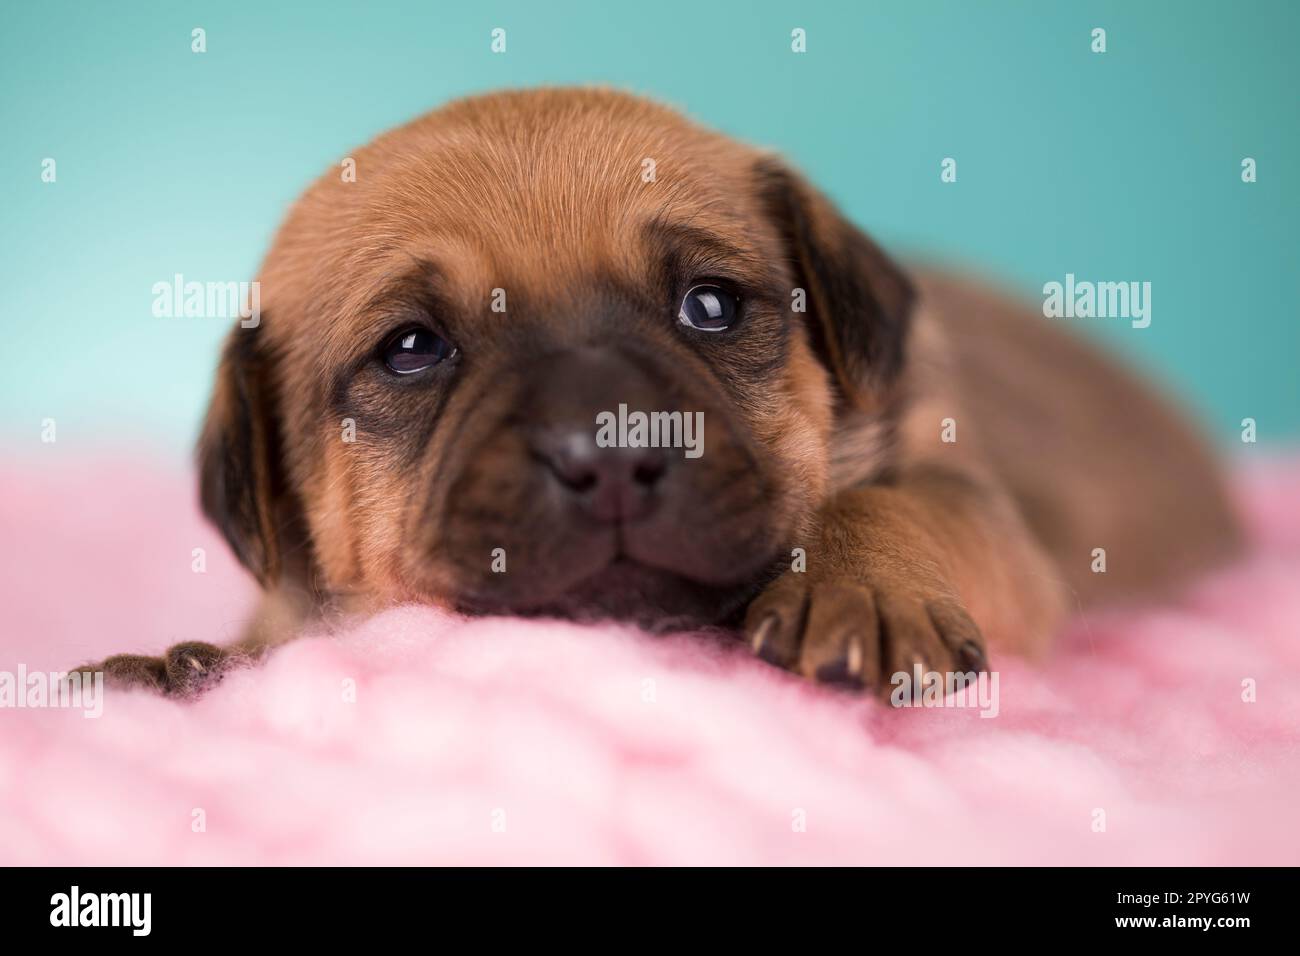 Sleeping dog in a on a blanket Stock Photo